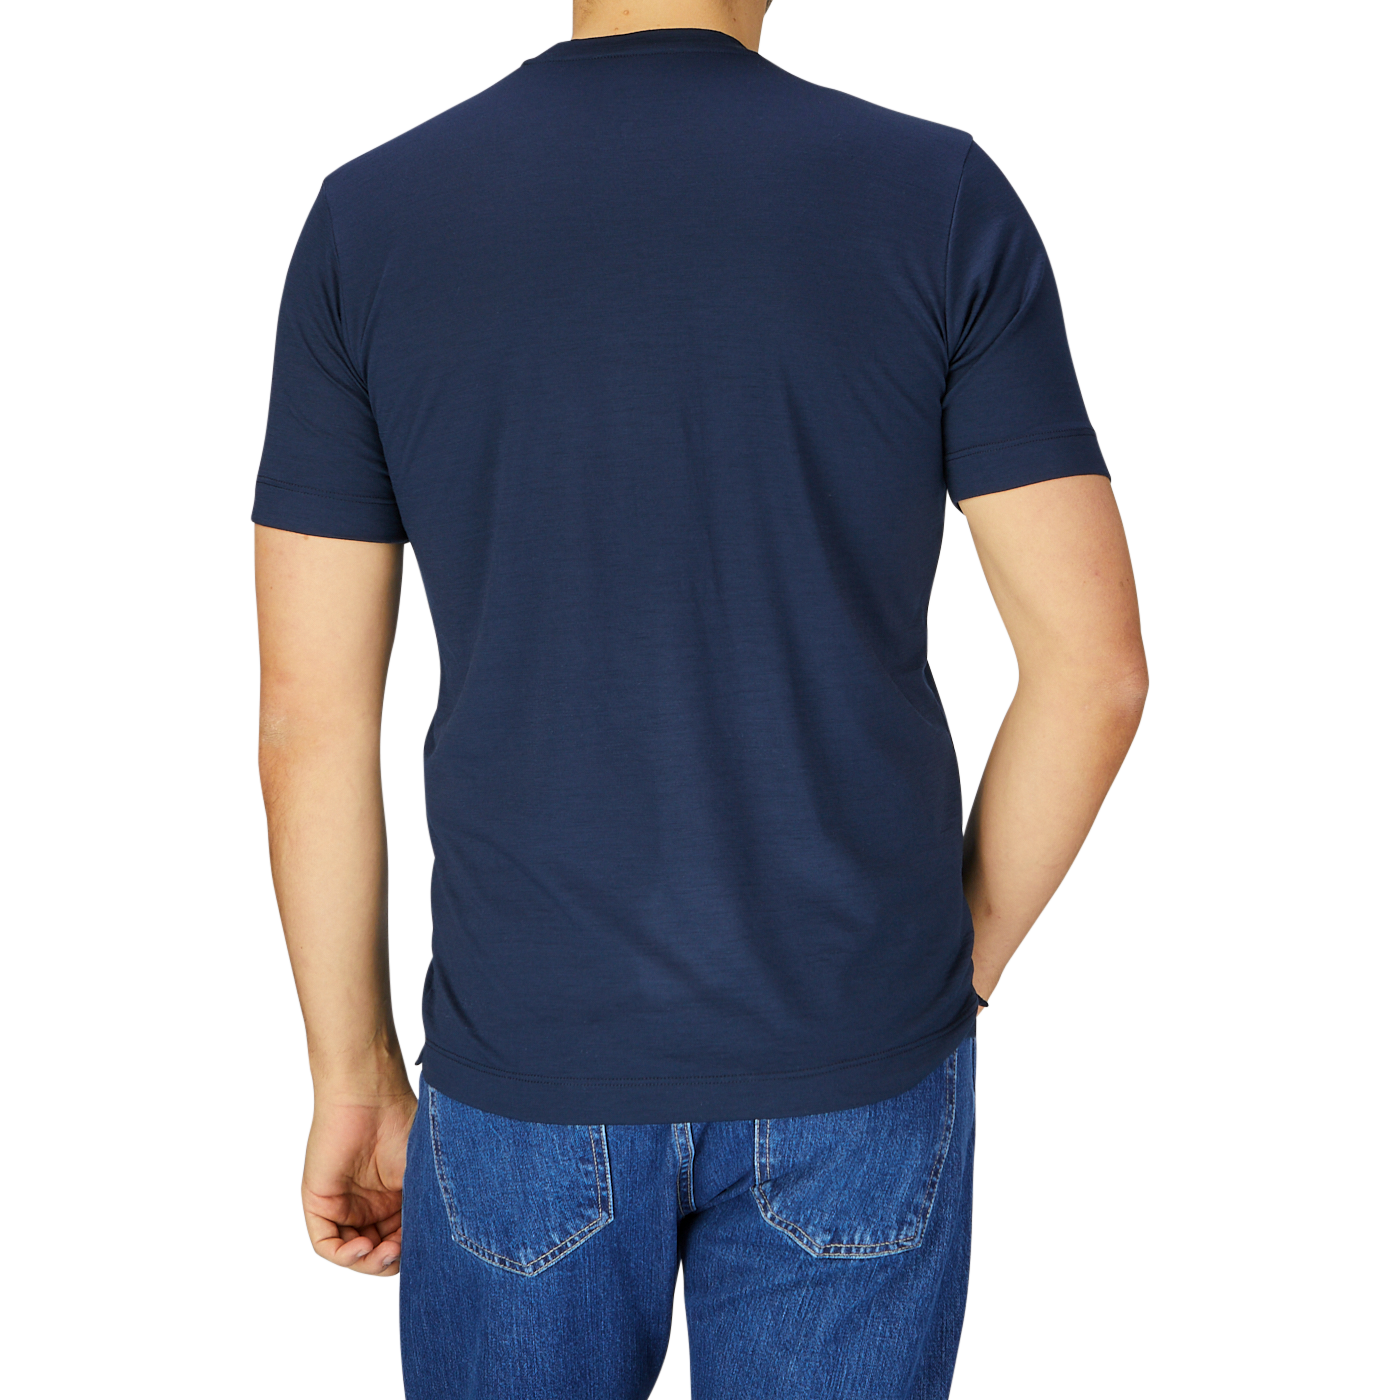 Rear view of a man wearing a Mazzarelli Navy Blue Merino Wool T-Shirt and blue denim jeans, standing against a light gray background.